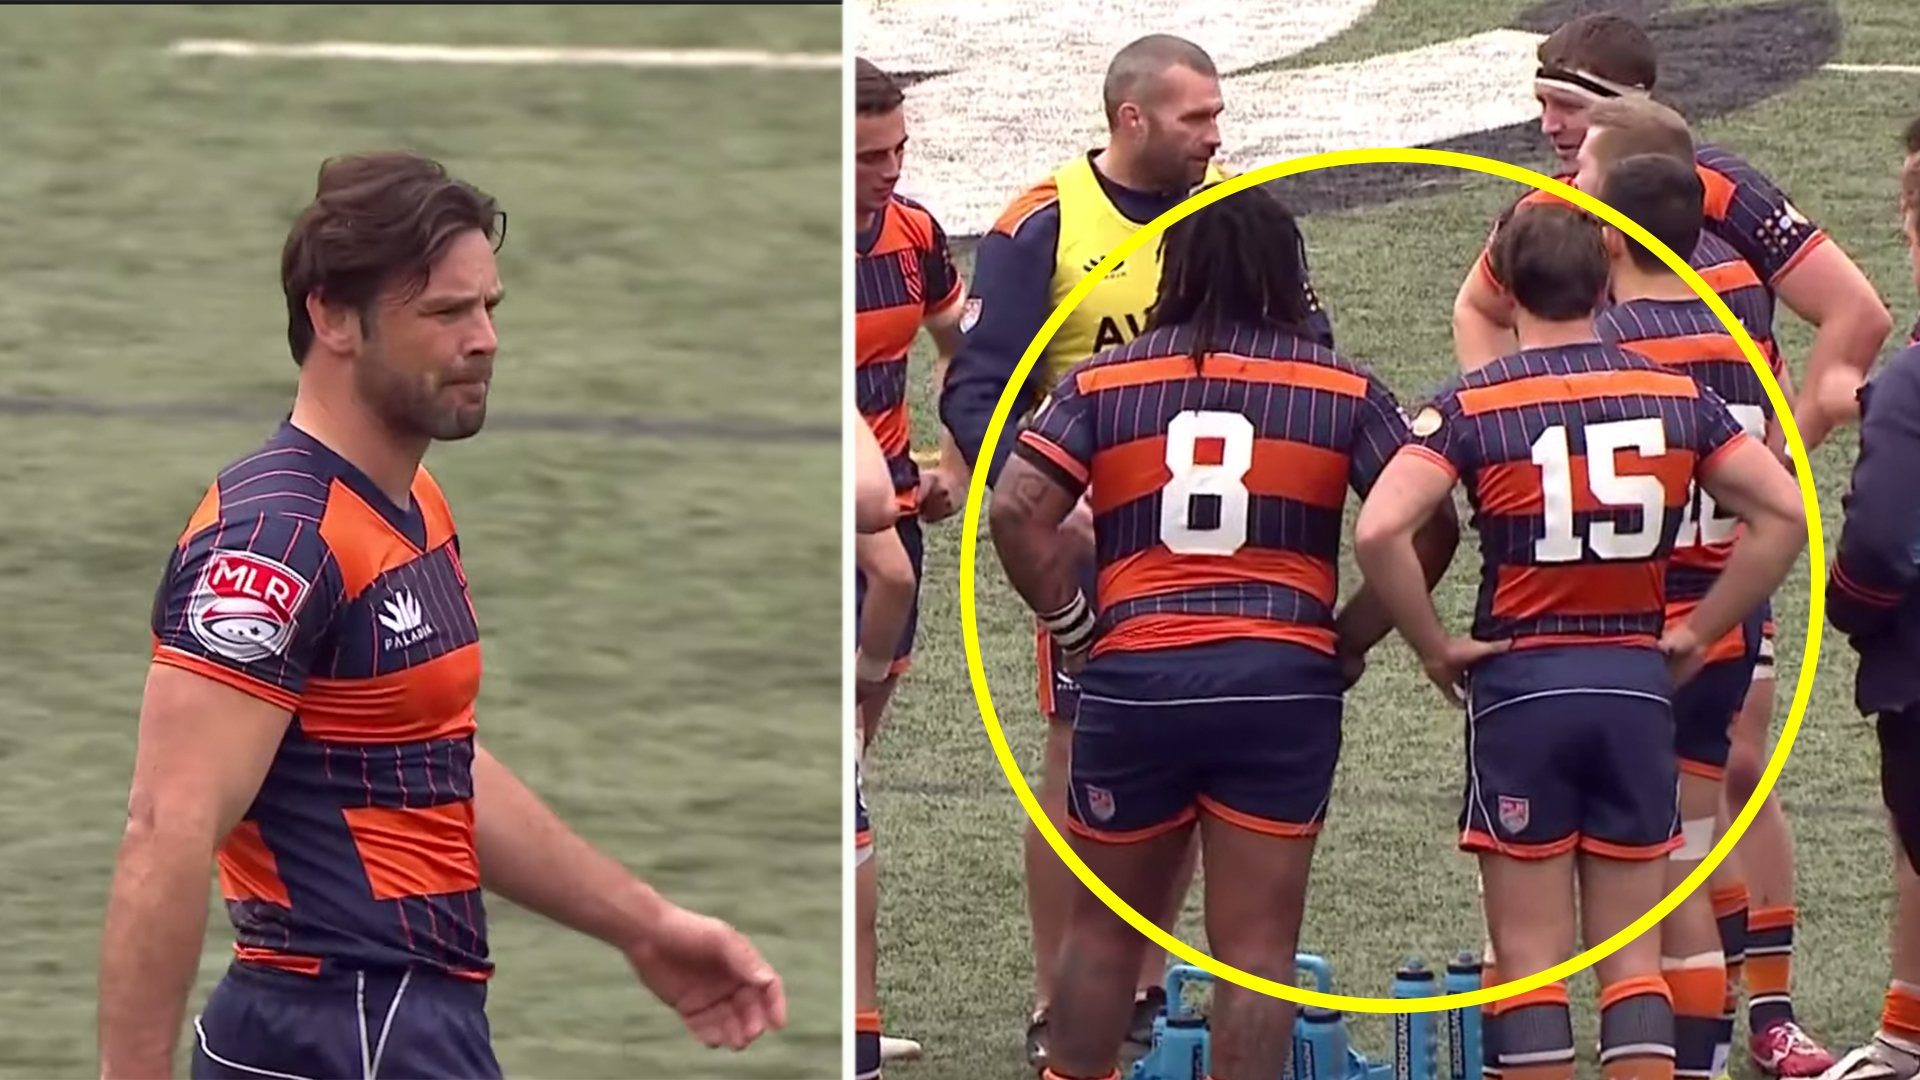 Ex England International full back Ben Foden is noticeably slower then he once was, but still dominates MLR